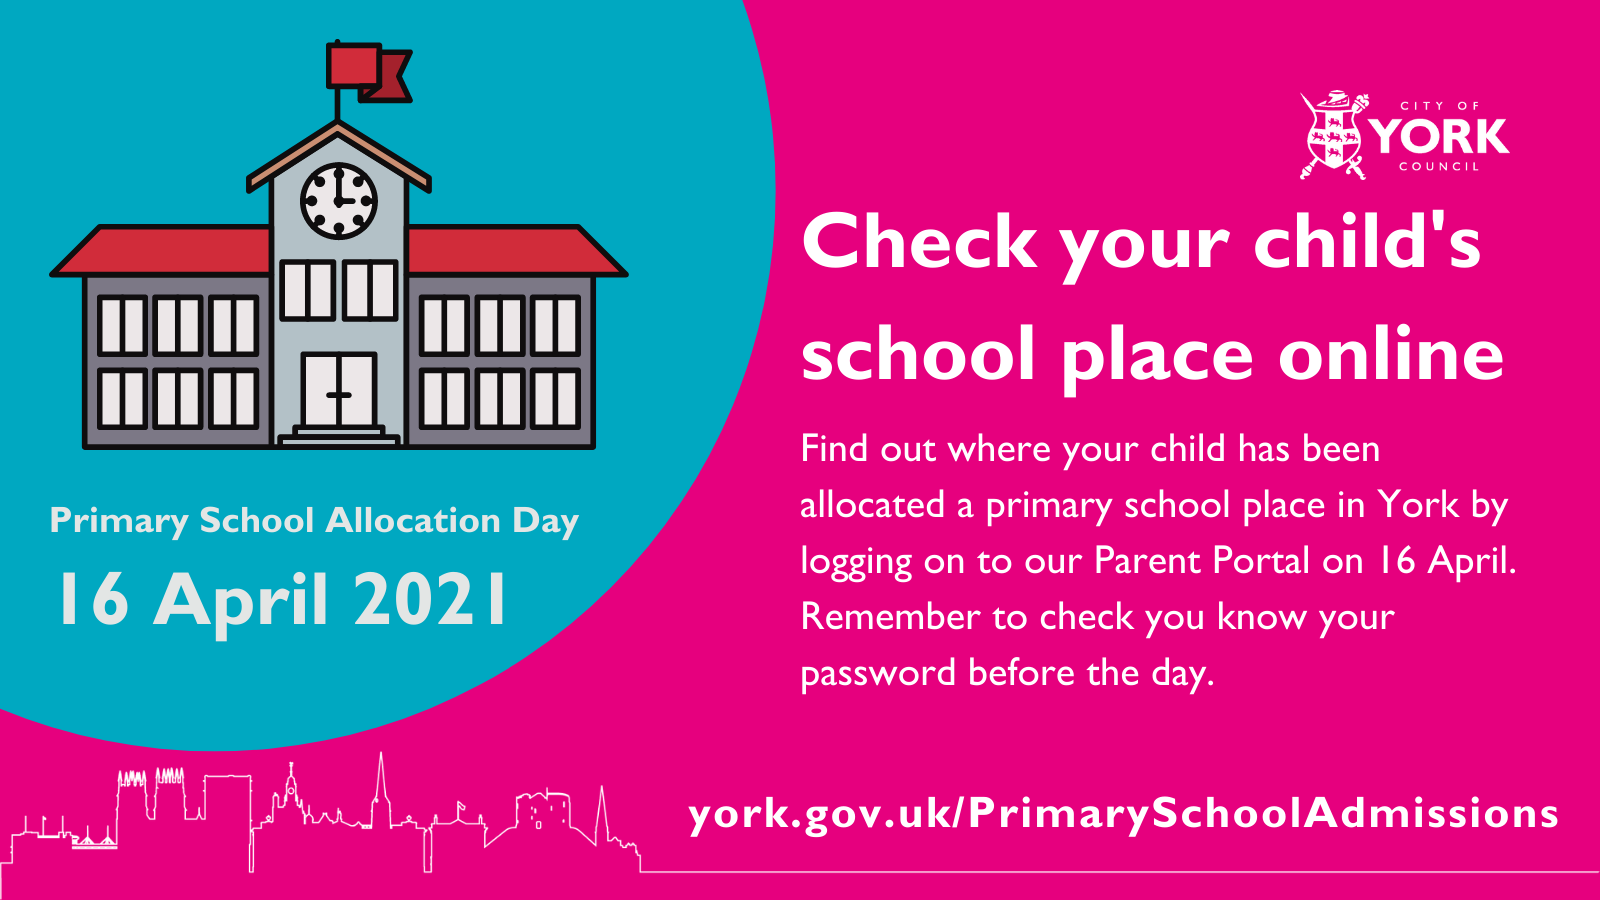 Text reads: Primary School Allocation Day, 16 April 2021. Check your child's school place online. Find out where your child has been allocated a primary school place by logging on to our Parent Portal on 16 April. Remember to check you know your password before the day.